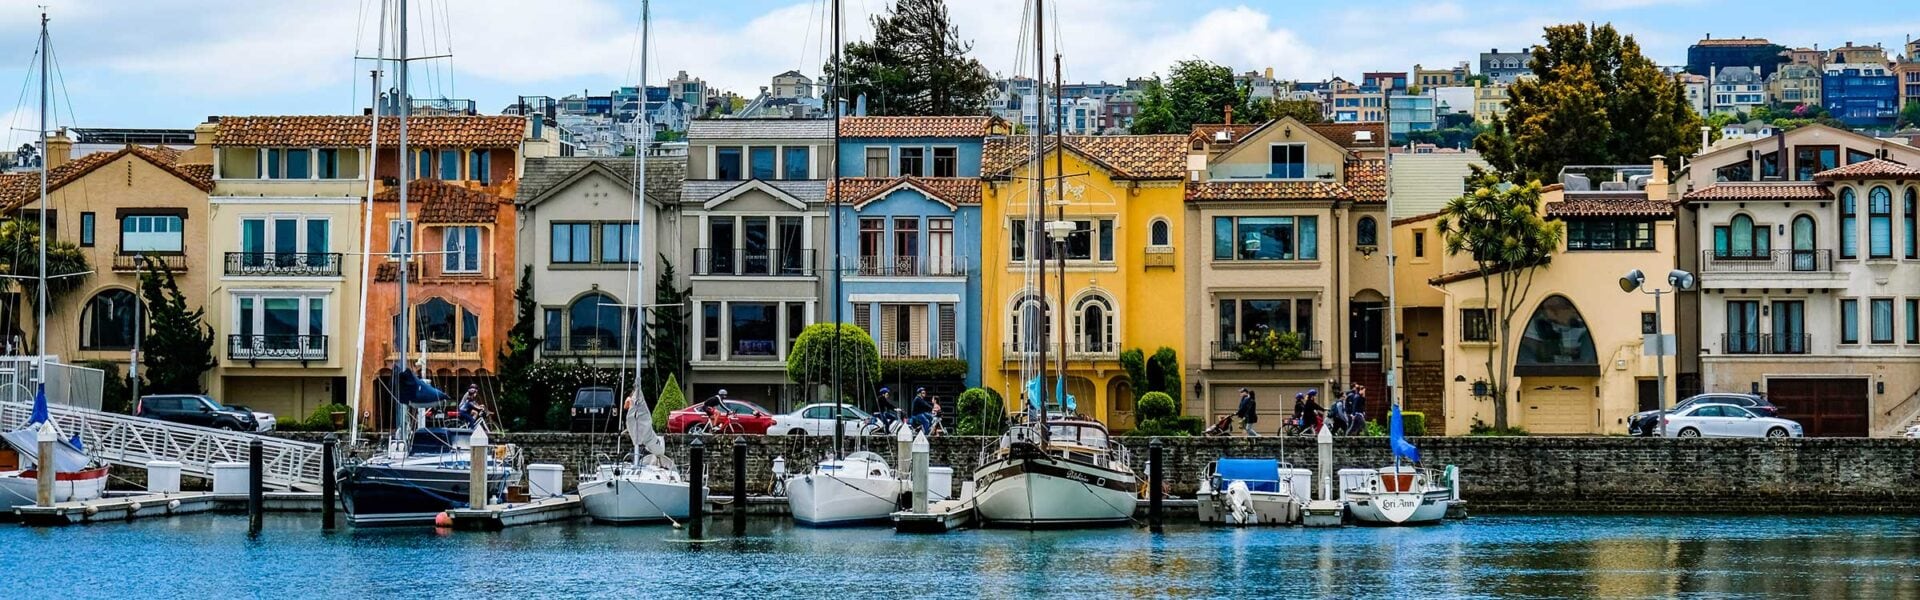 San Francisco shoreline at the harbor, with colorful houses & boats in the water.